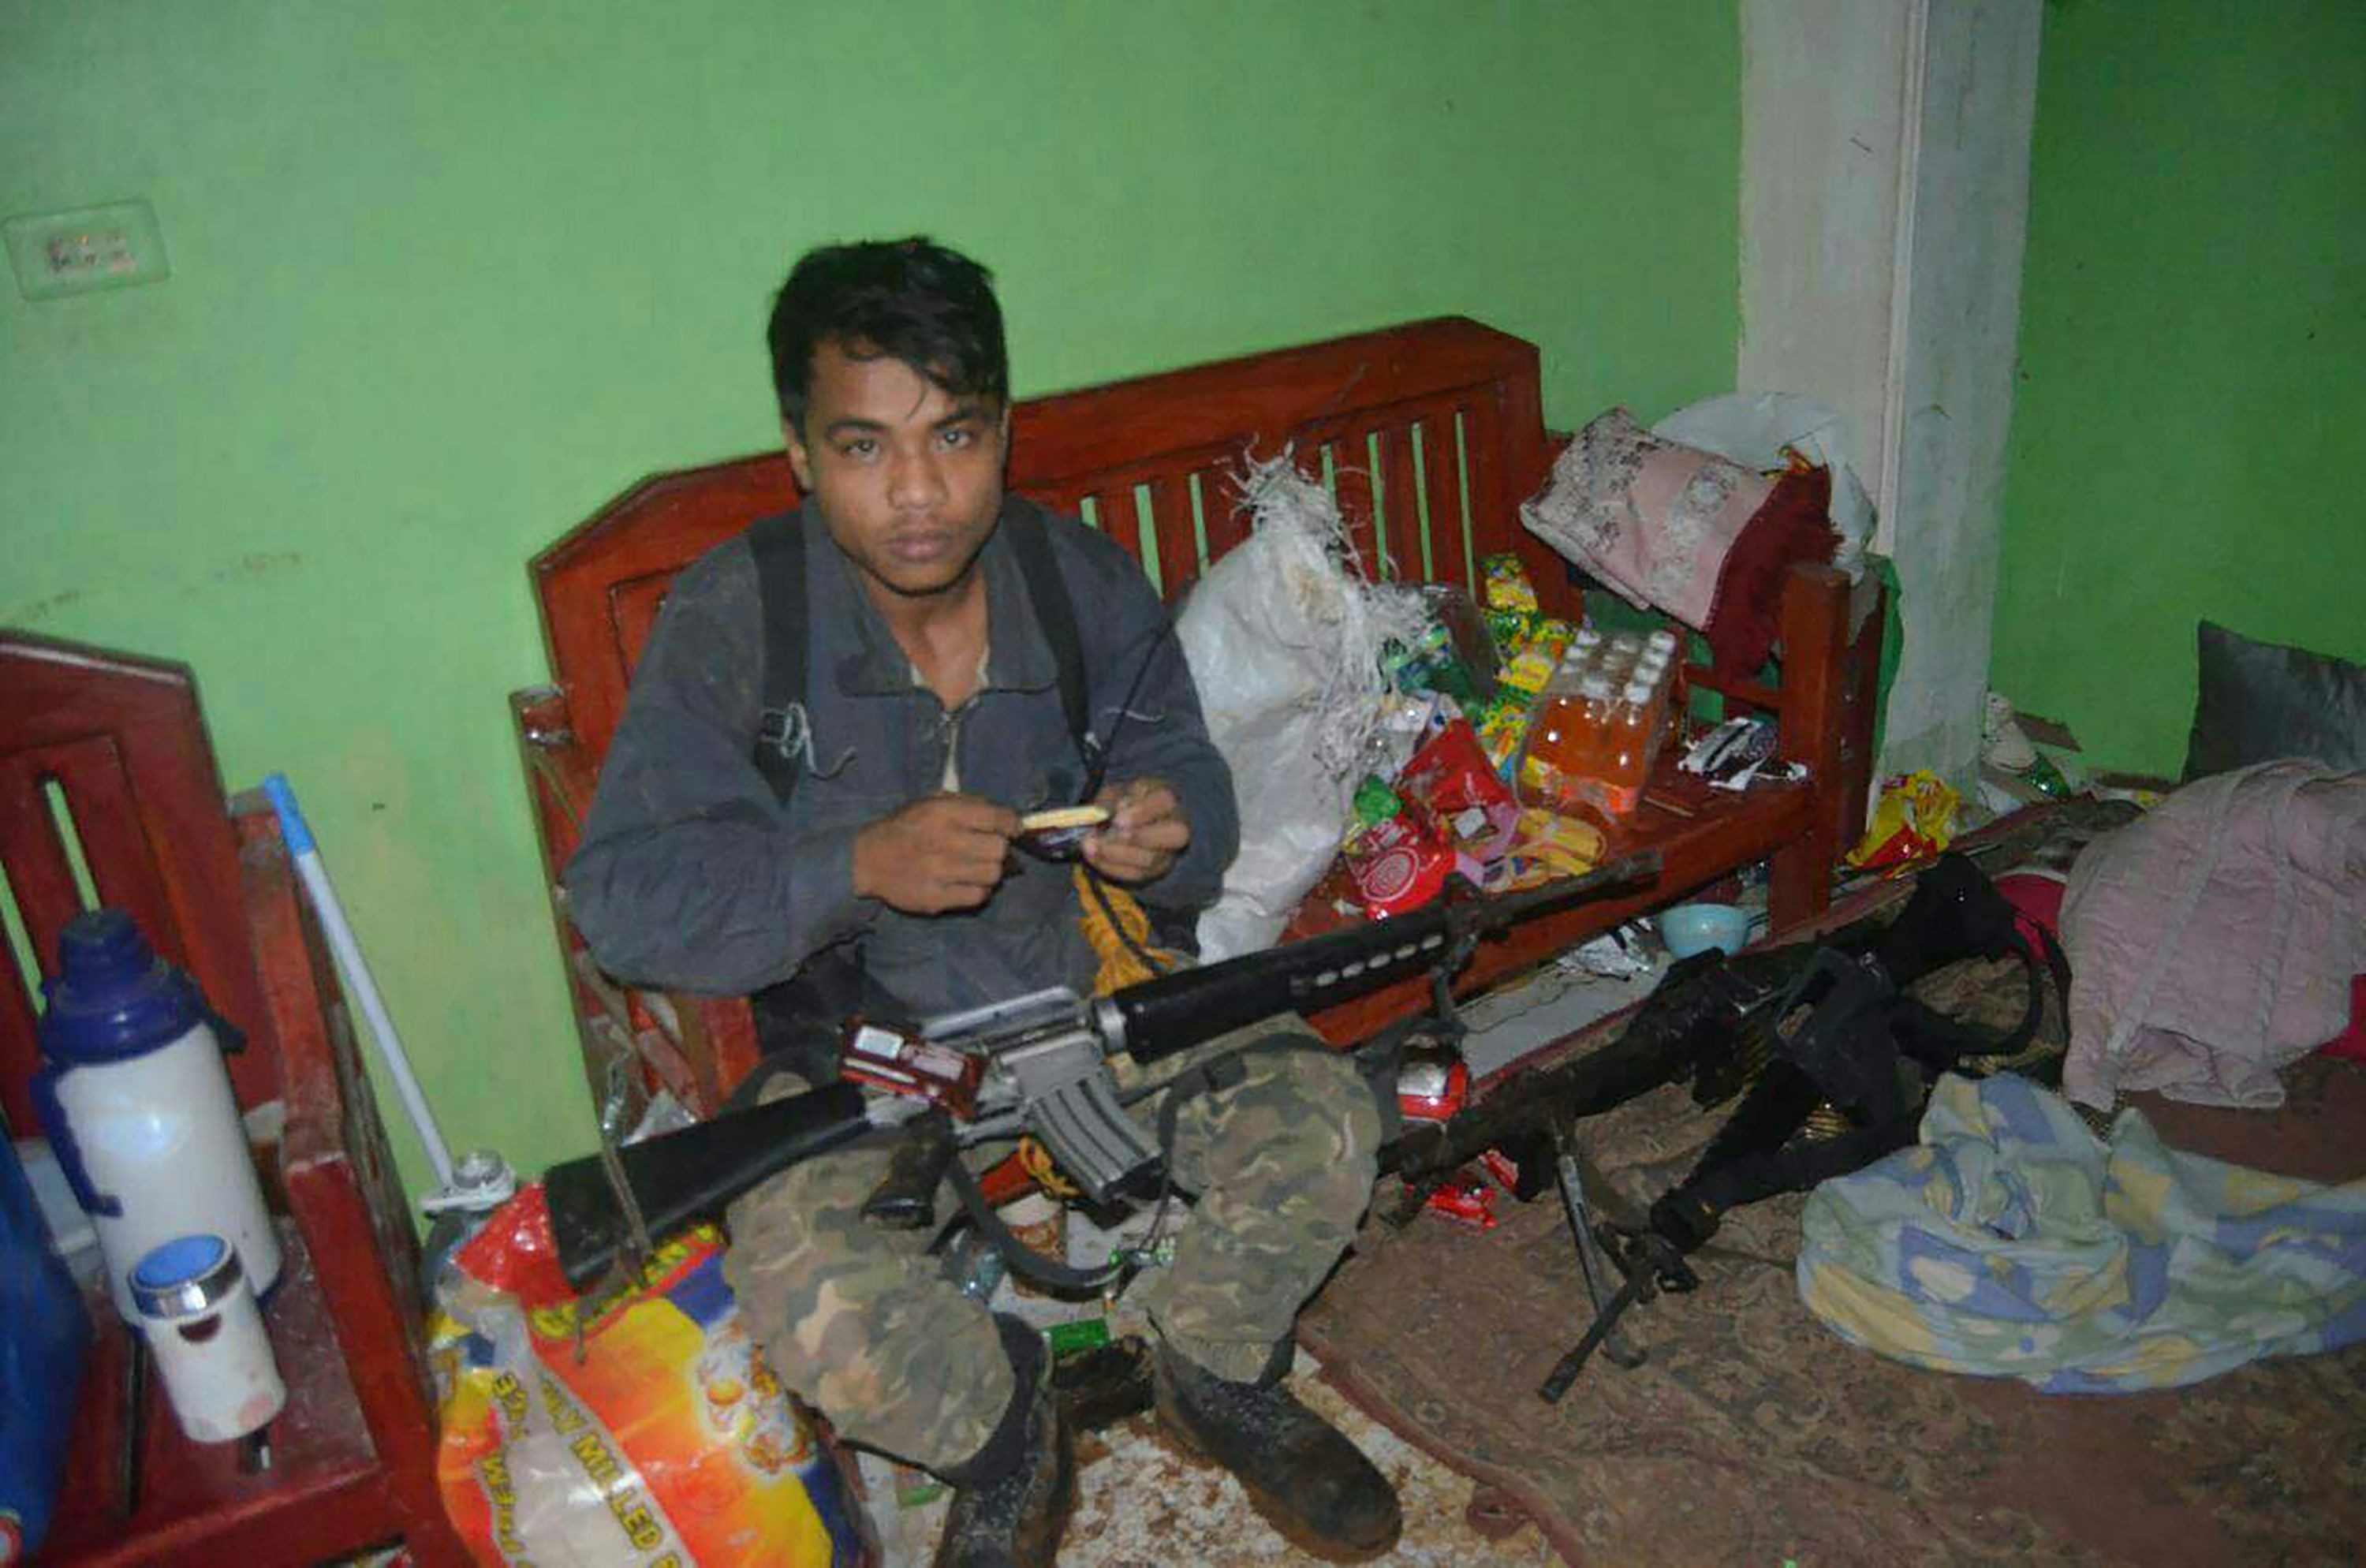 A member of the militant Maute group is seen inside a house in Marawi in July, two months after the Islamic State-affiliated group seized the city. Photo: AFP